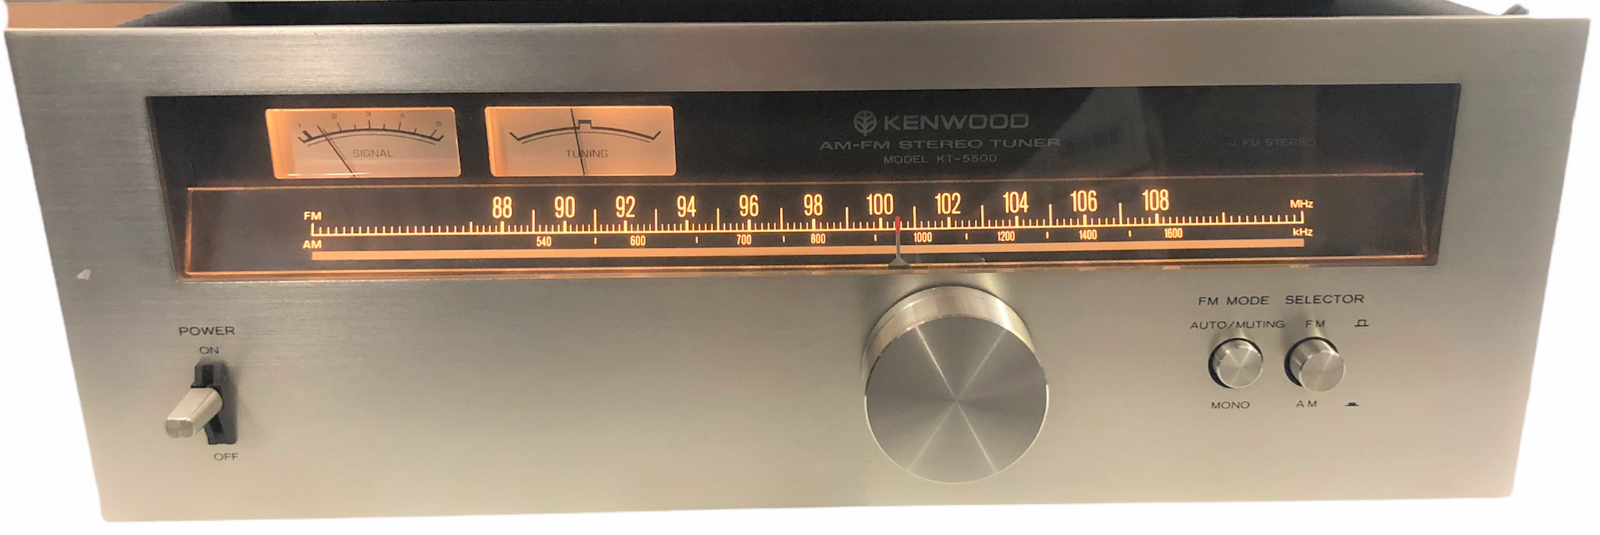 5 trend rank ☆ very popular Kenwood KT-5500 AM FM Vintage Silver Made In Faced Tuner Stereo